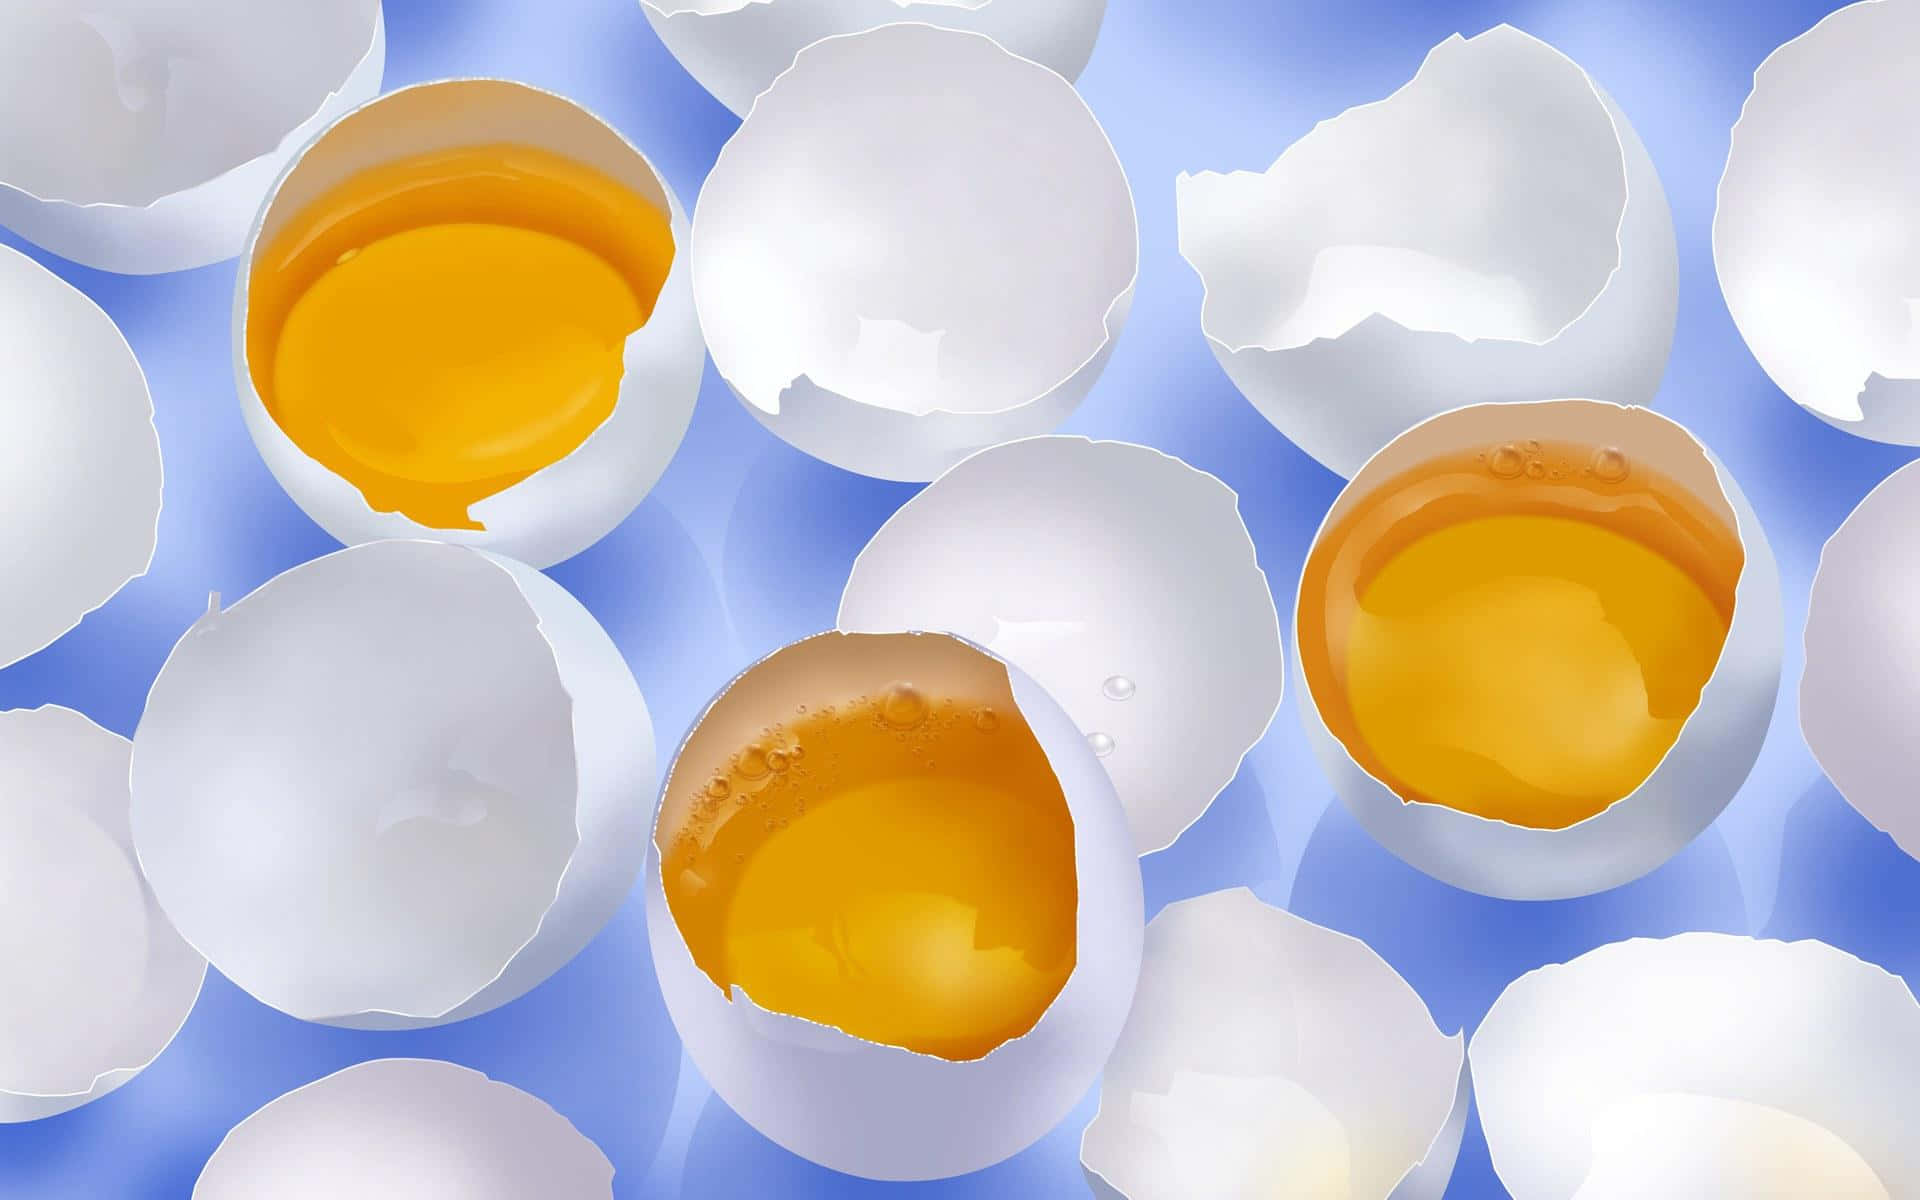 A Group Of Eggs With White And Yolks On A Blue Background